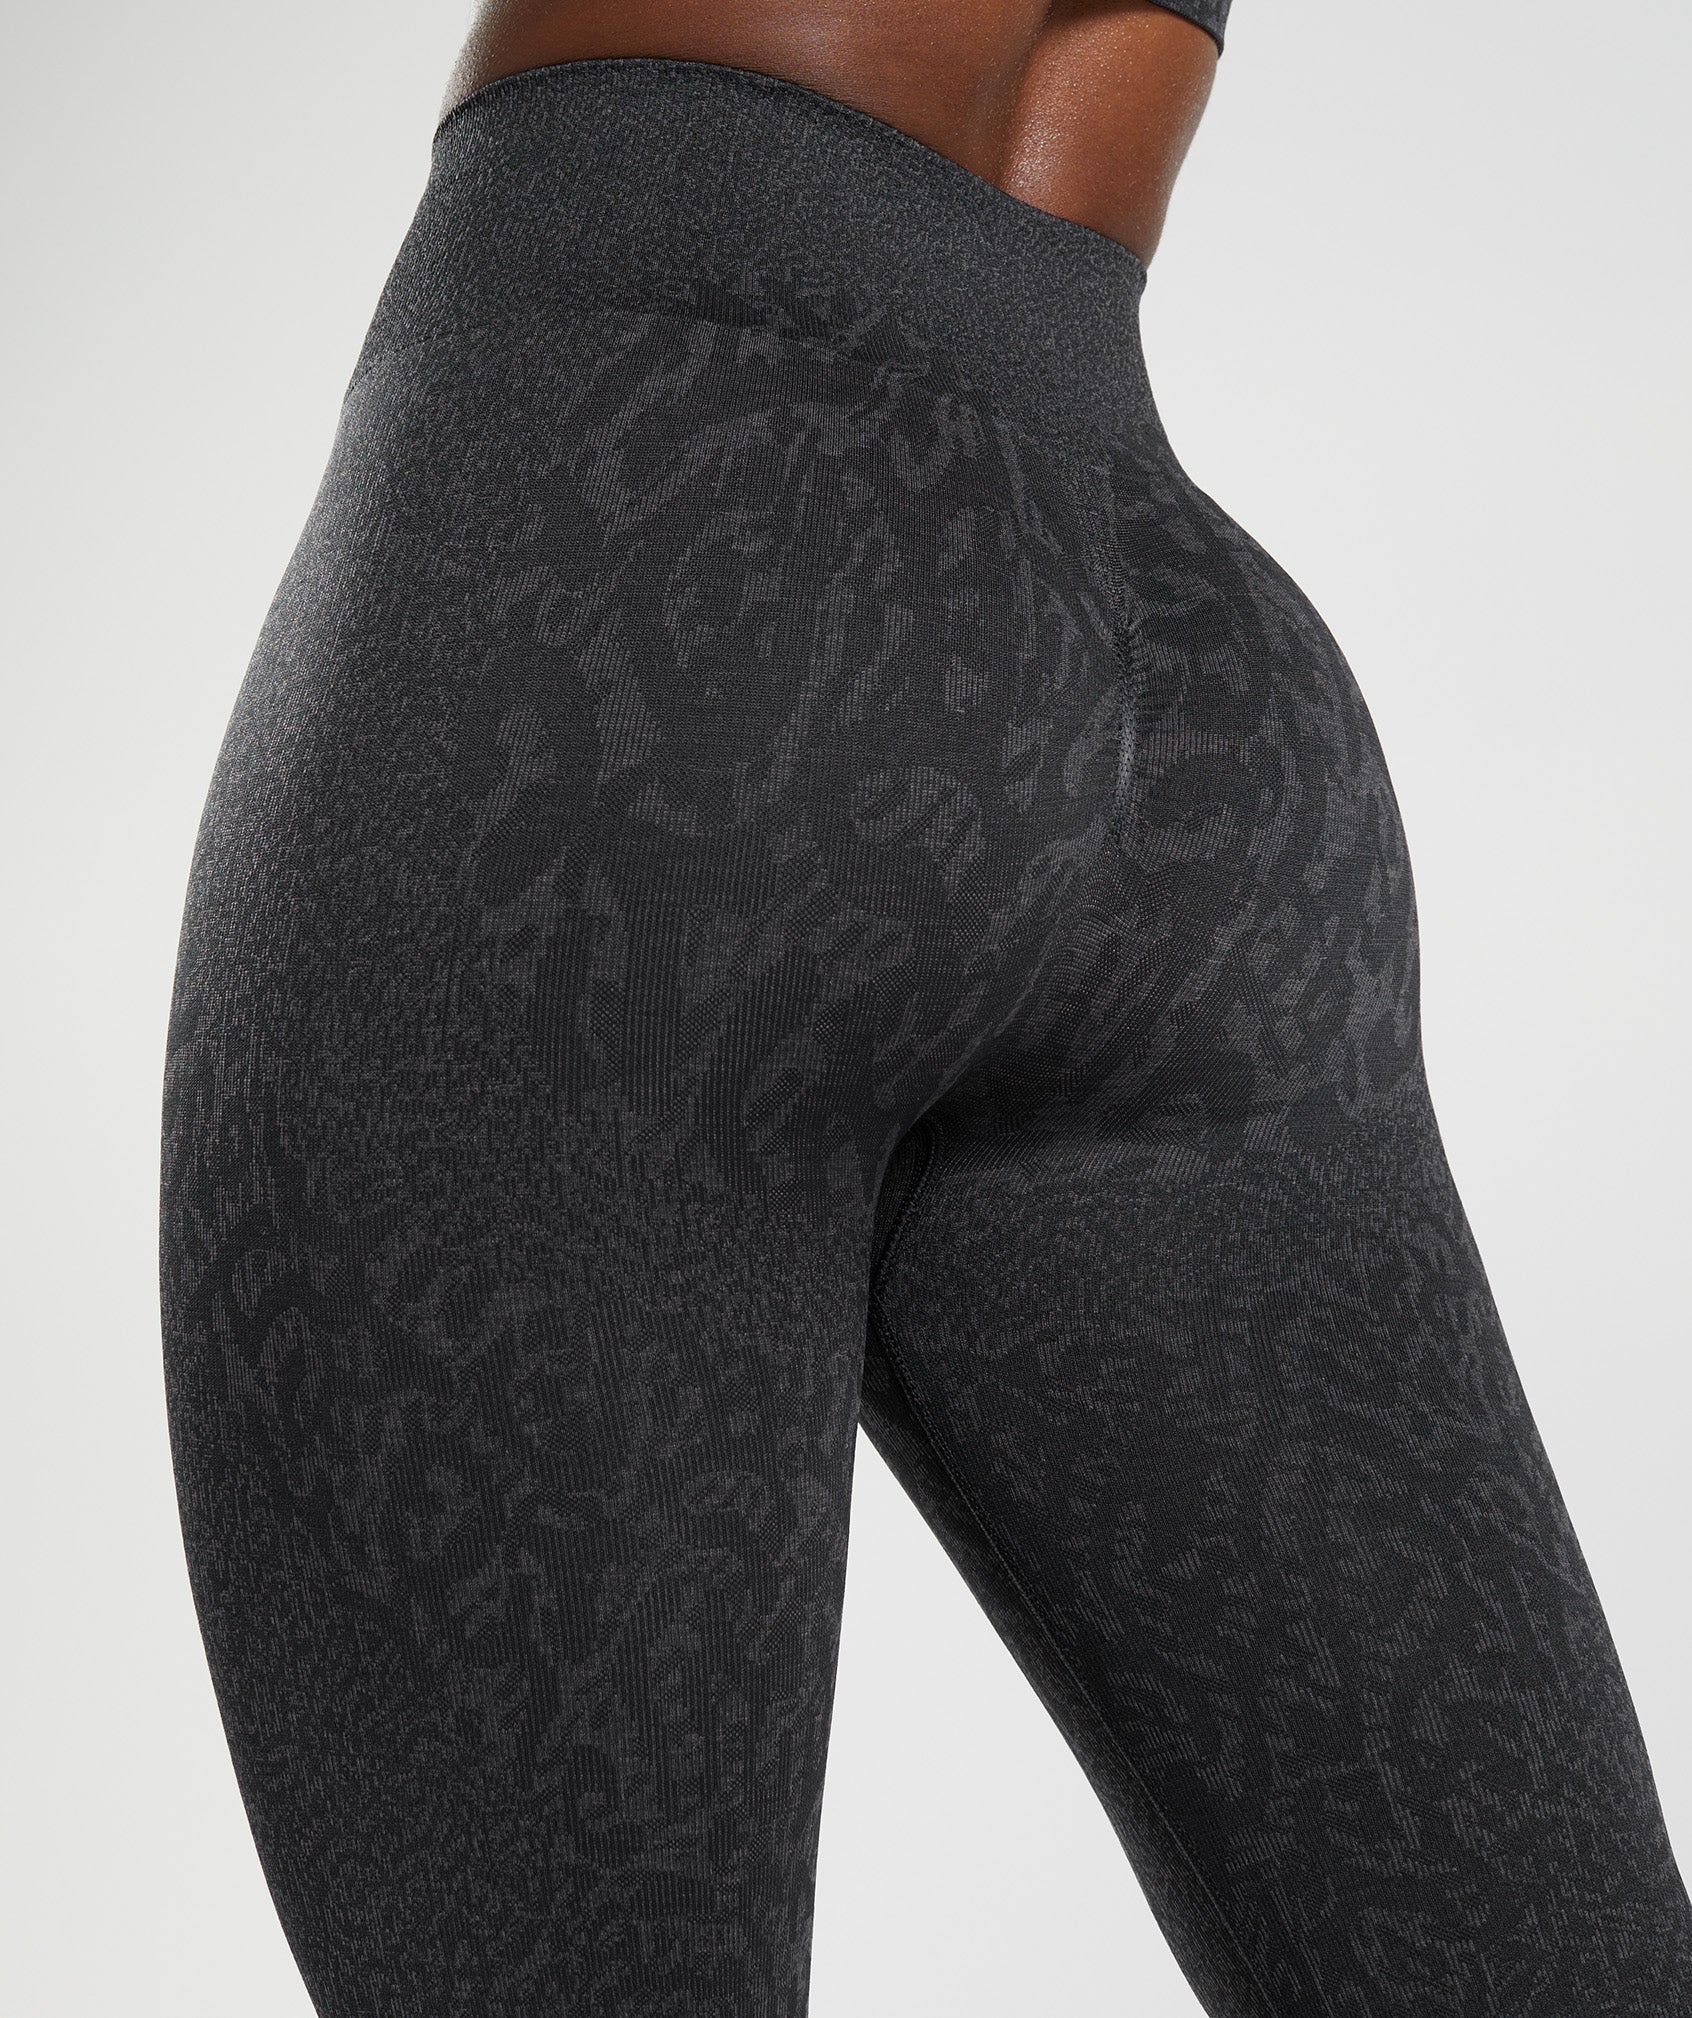 Gymshark Adapt Animal Seamless Leggings - Reef  Cherry Brown Medium - $48  (25% Off Retail) New With Tags - From Ilana